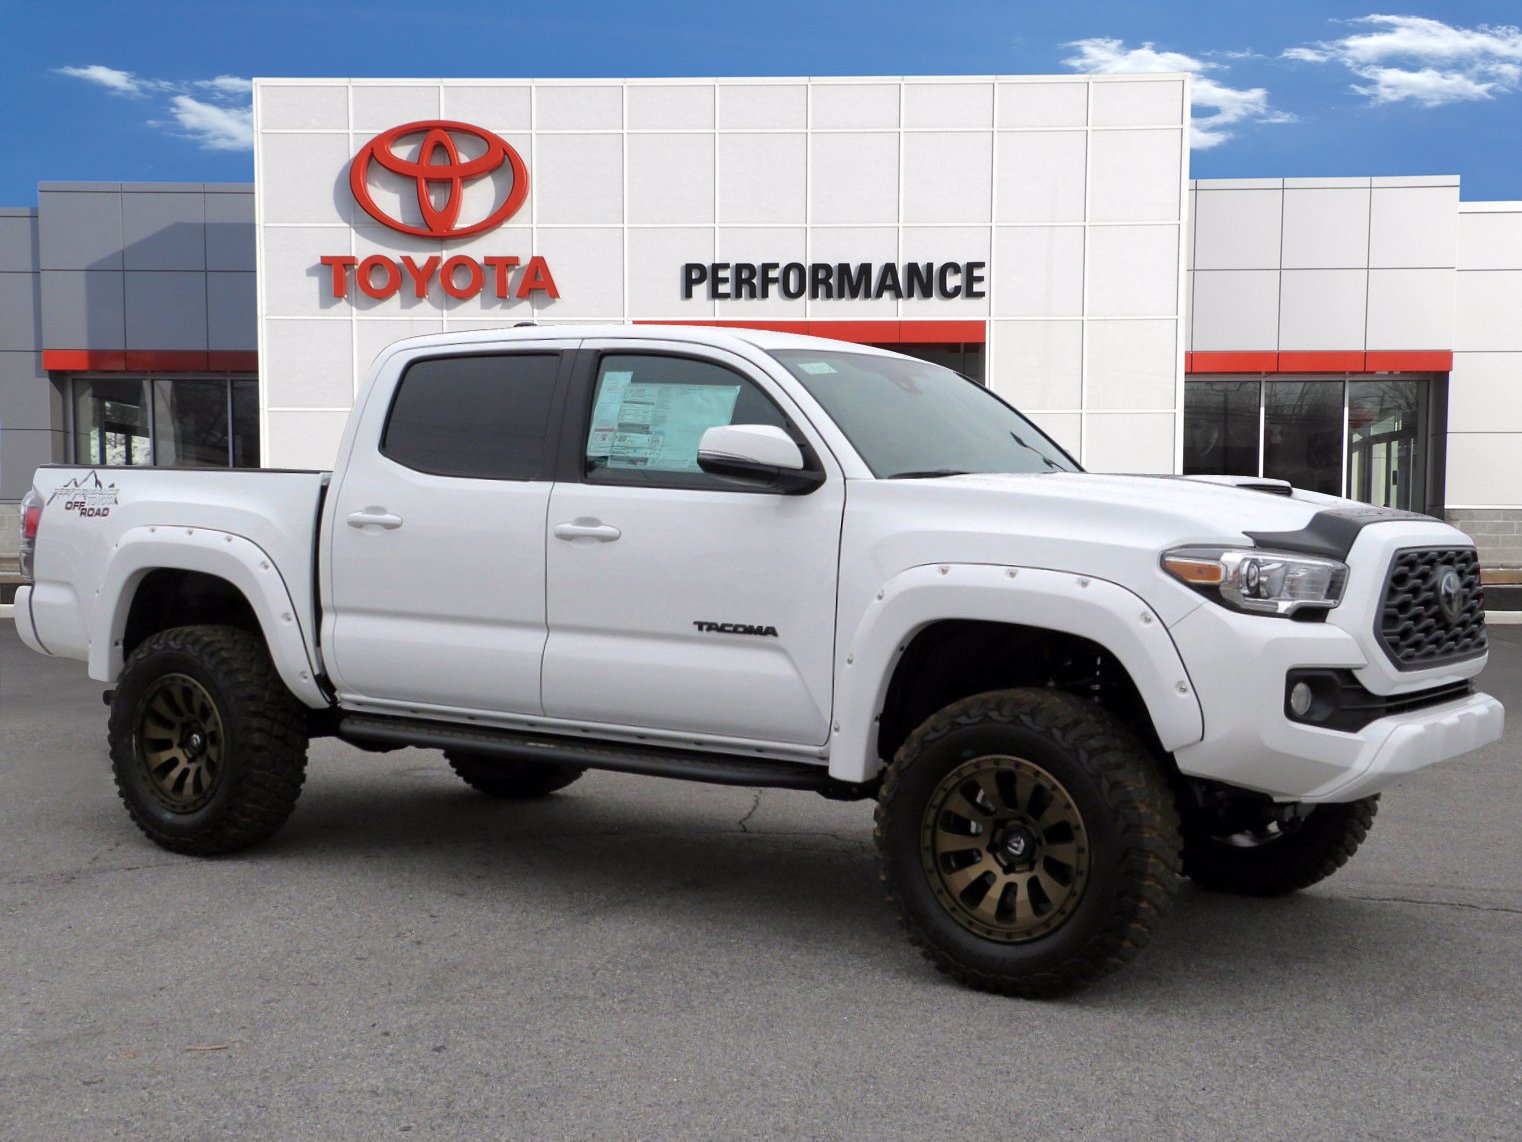 New 2020 Toyota Tacoma 4wd Trd Sport Crew Cab Pickup In Sinking Spring 205062 Performance Toyota